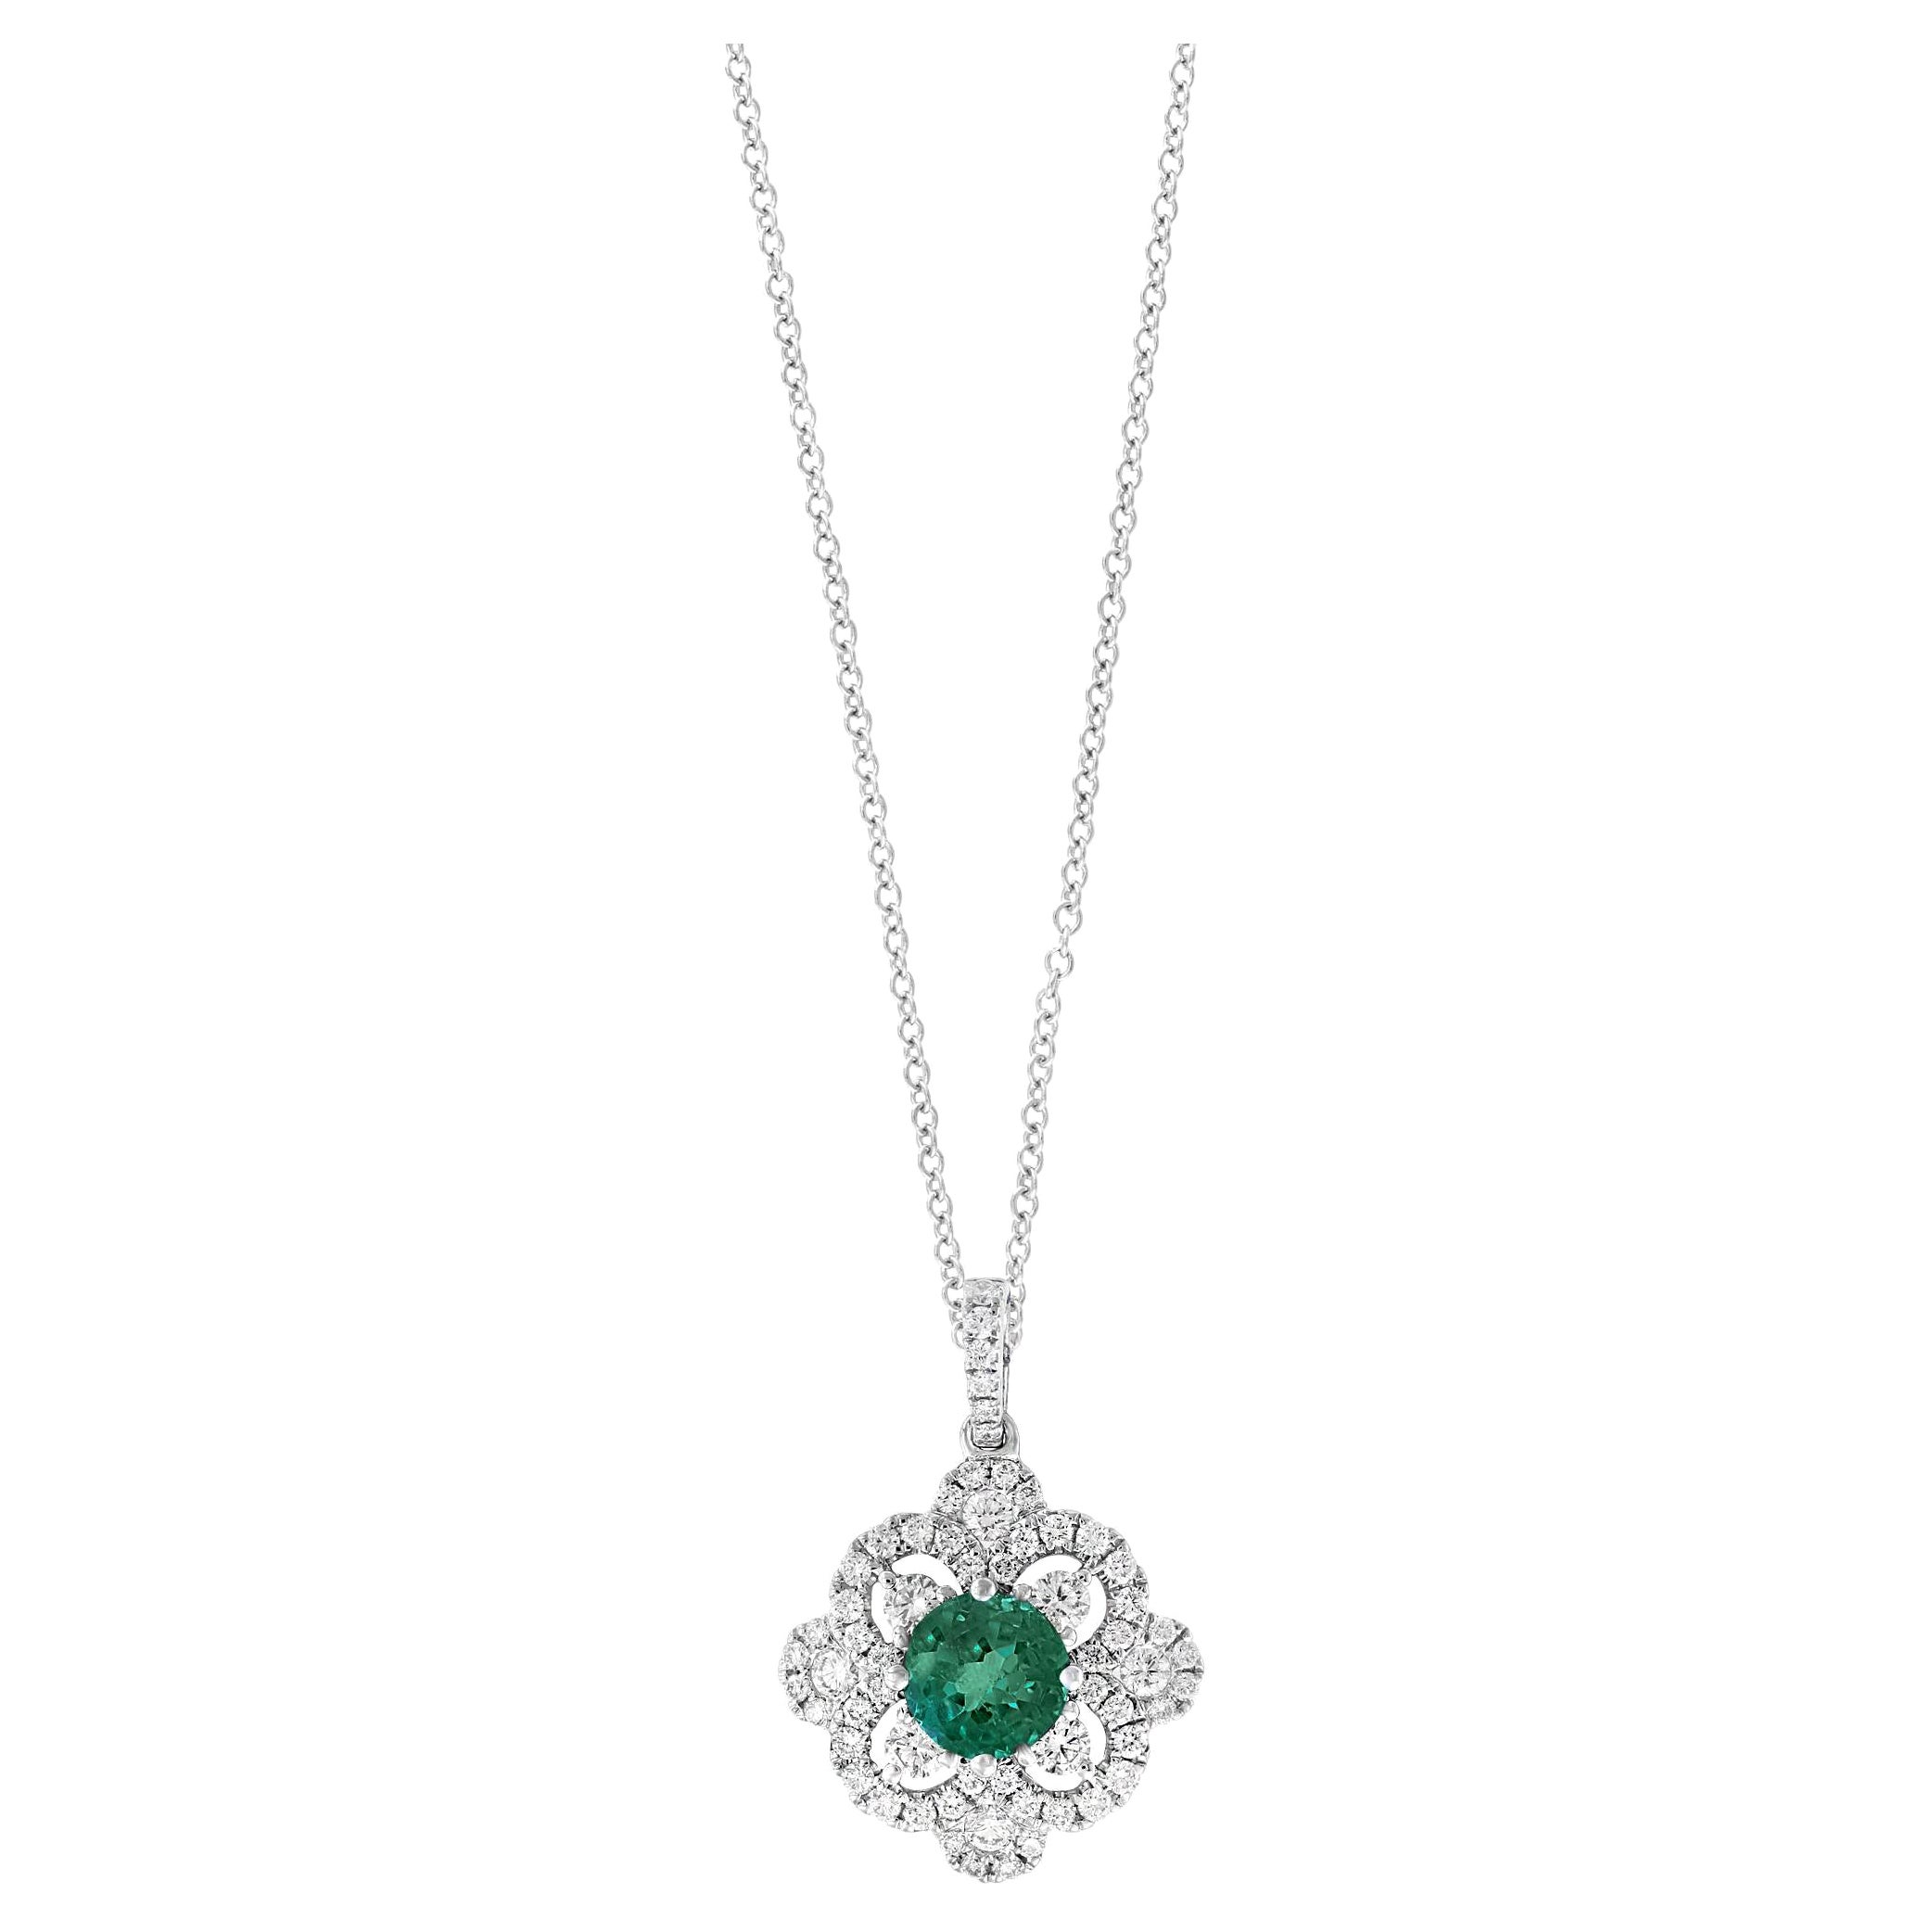 0.81 Carat Round Cut Emerald and Diamond Pendant Necklace in 18K For Sale